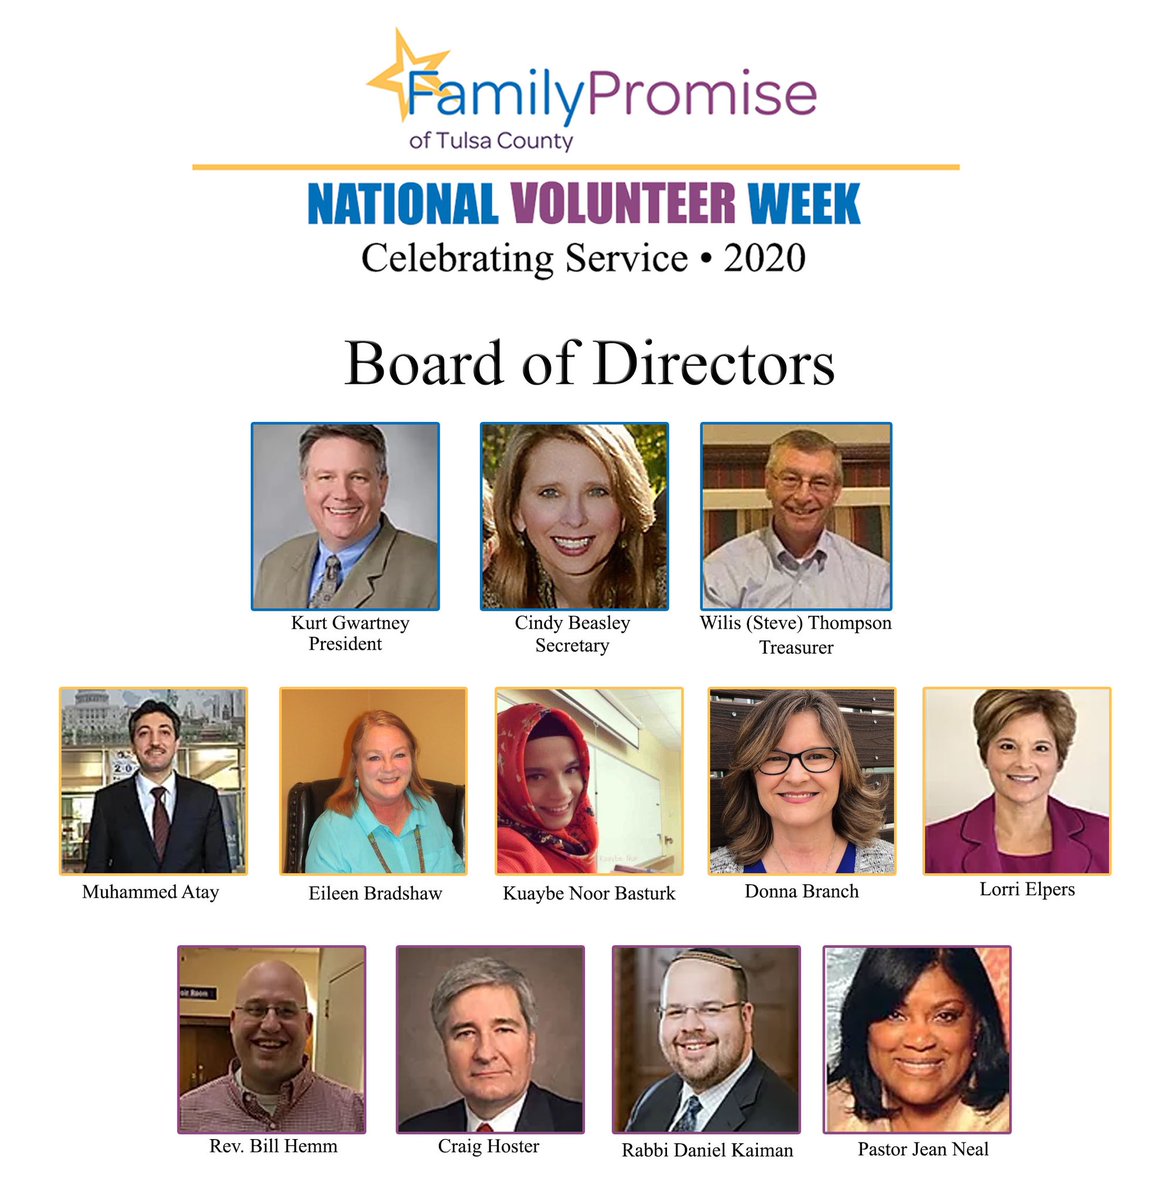 We are so thankful for our amazing board of directors. Thank you for donating your time, talents, and treasure to end homelessness...one family at a time! #volunteerrecognitionweek